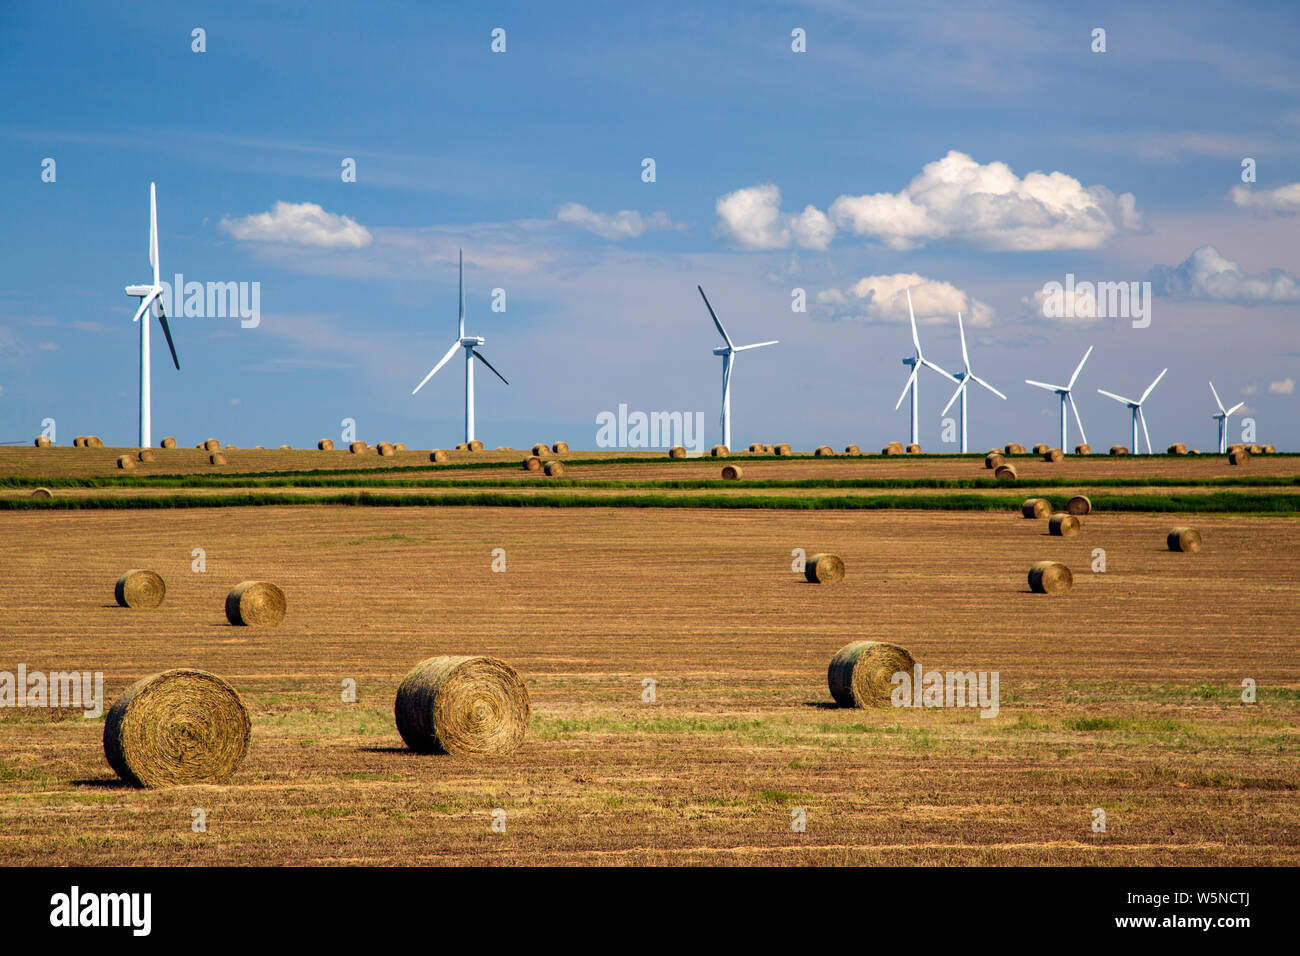 Renewable energy wind turbines in a harvested agricultural field with bales hay in the Canadian prairies of Alberta, Canada. Stock Photo